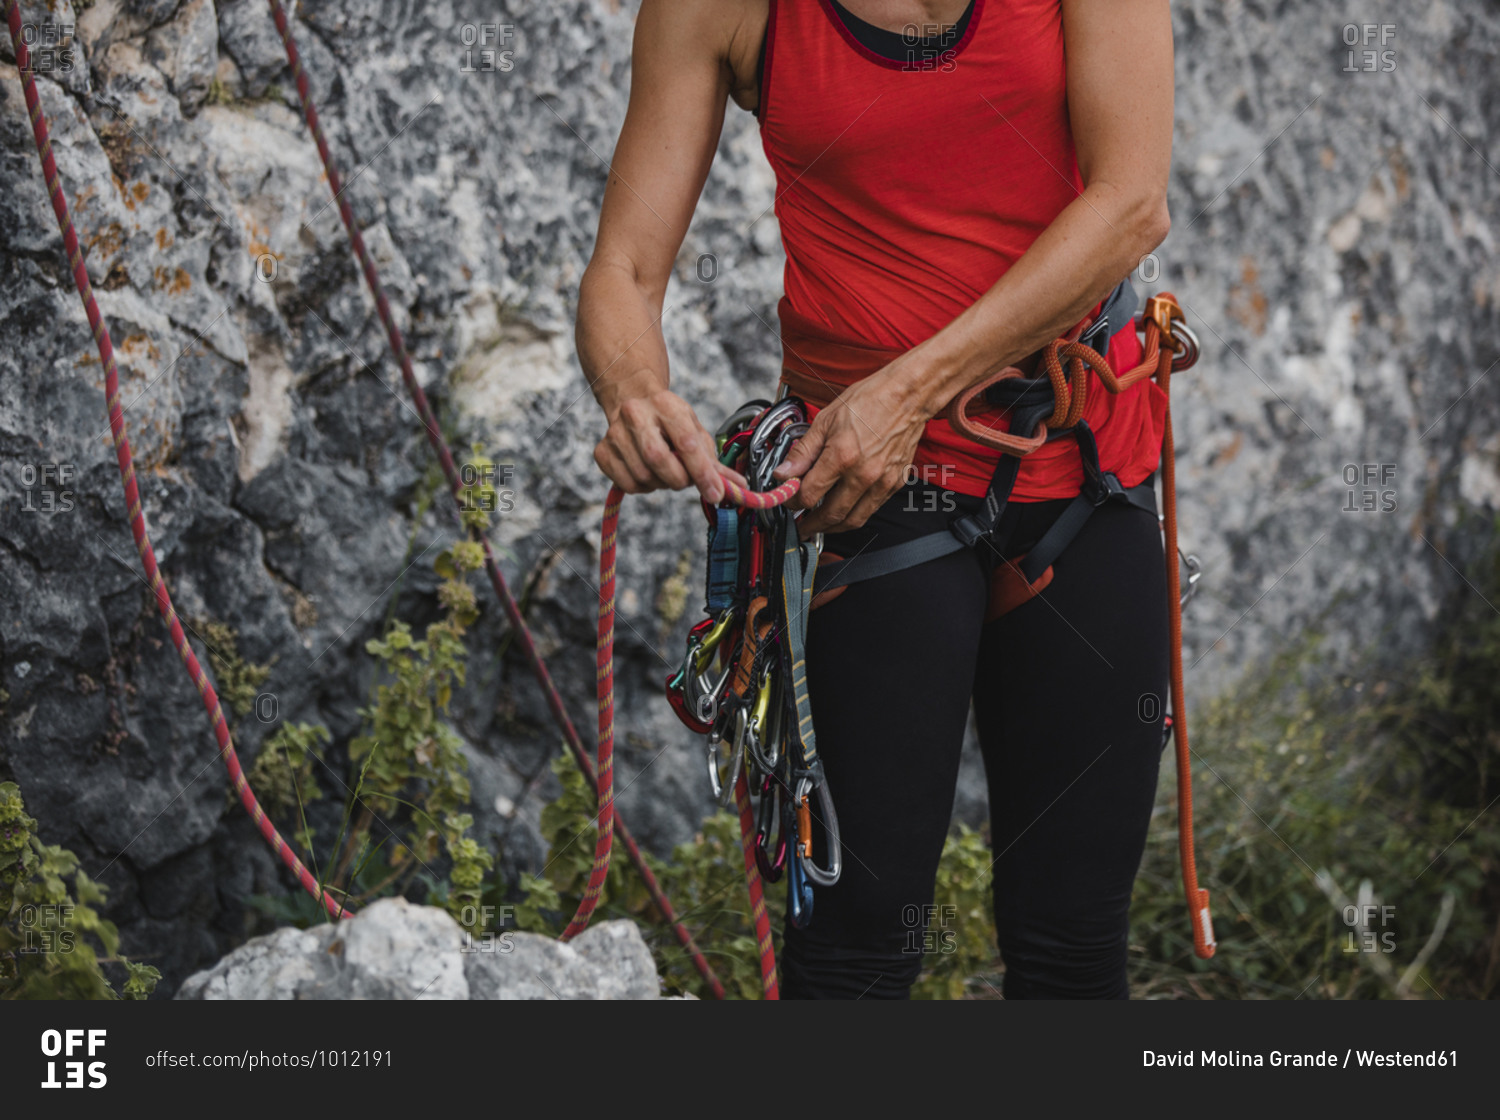 Woman adjusting ropes while preparing for rock climbing